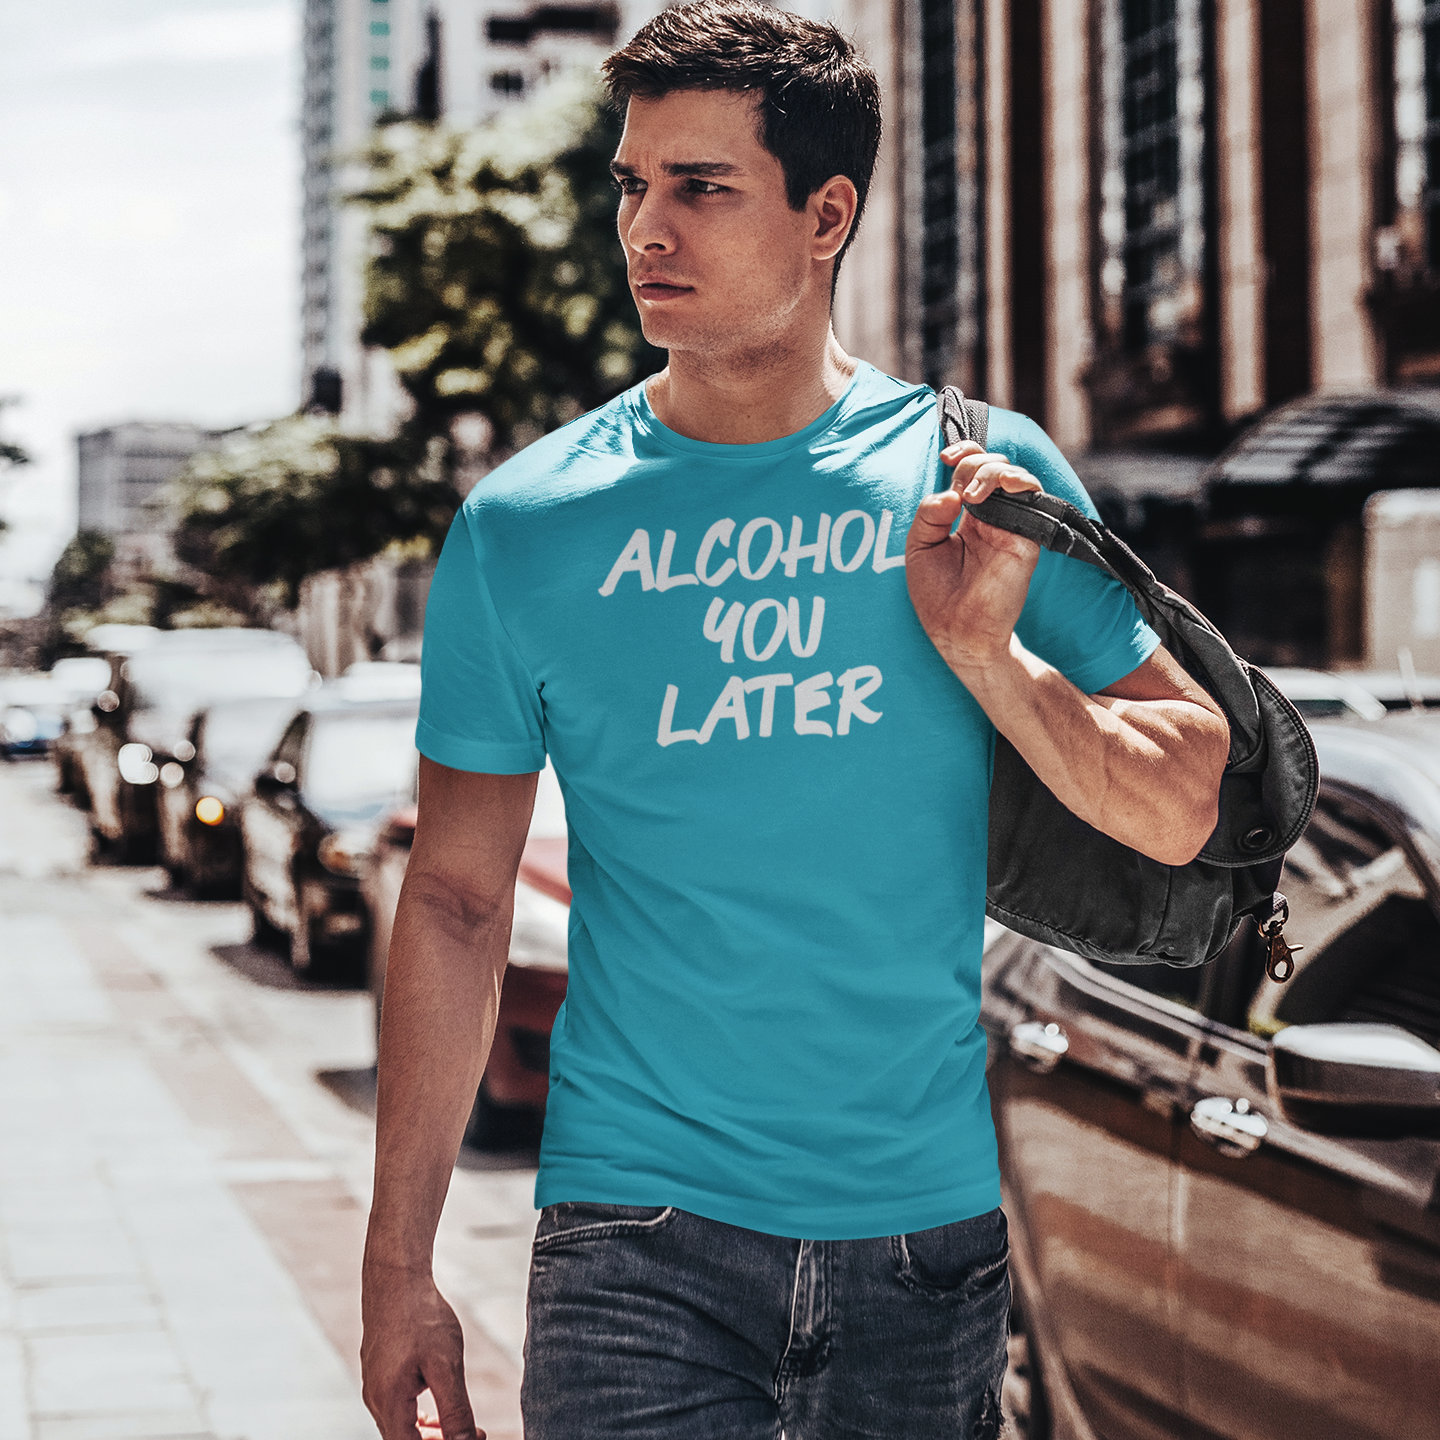 'Alcohol you later' volwassene shirt